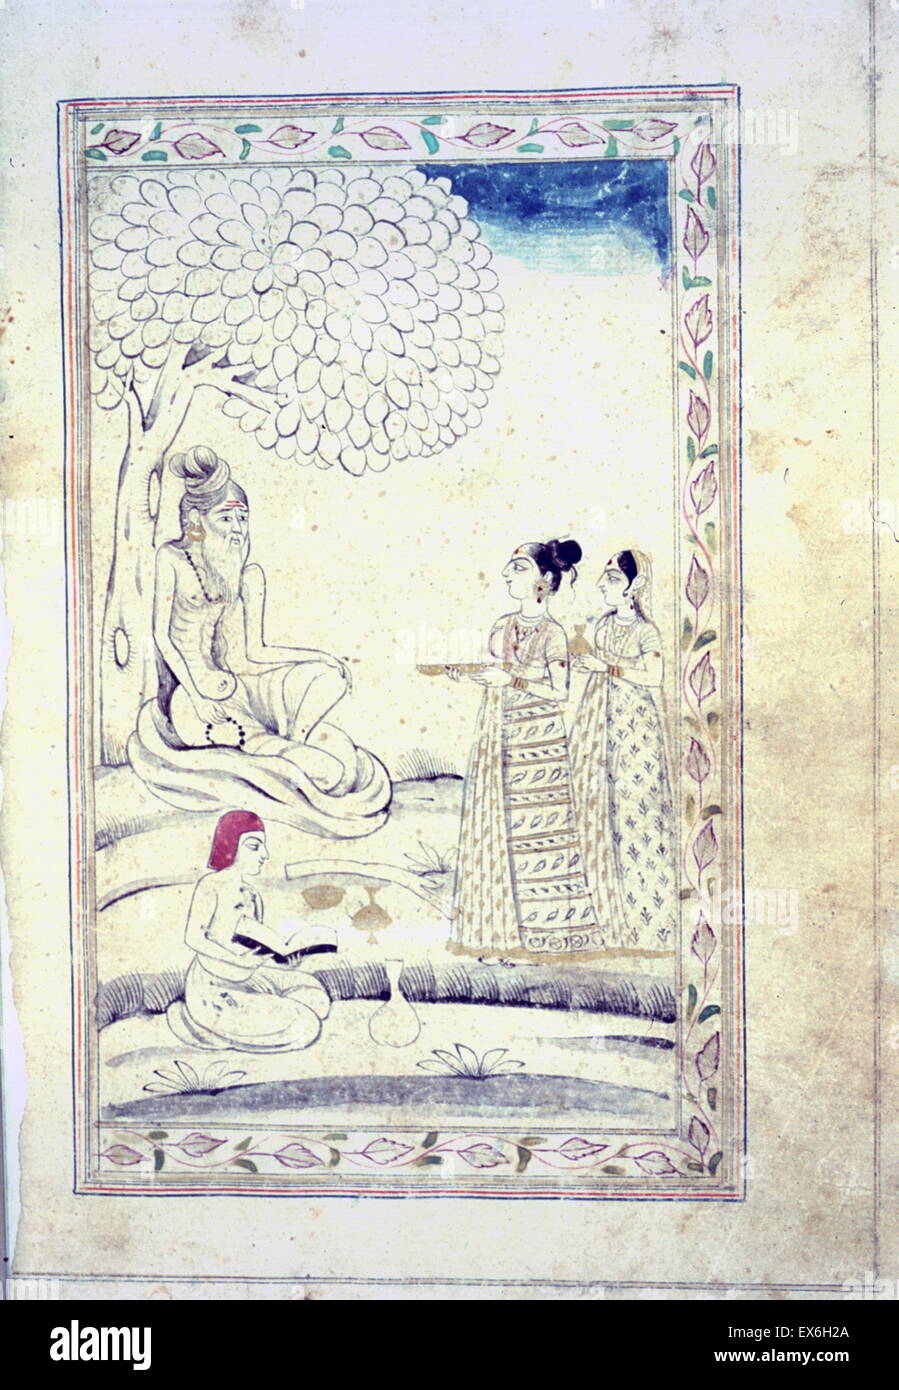 late Mughal style miniature A full-page miniature drawing in black ink with gilt and blue and red accents. An elderly ascetic or sage sits under a tree while two women approach bearing gifts and a male attendant in the foreground reads from a book. Stock Photo